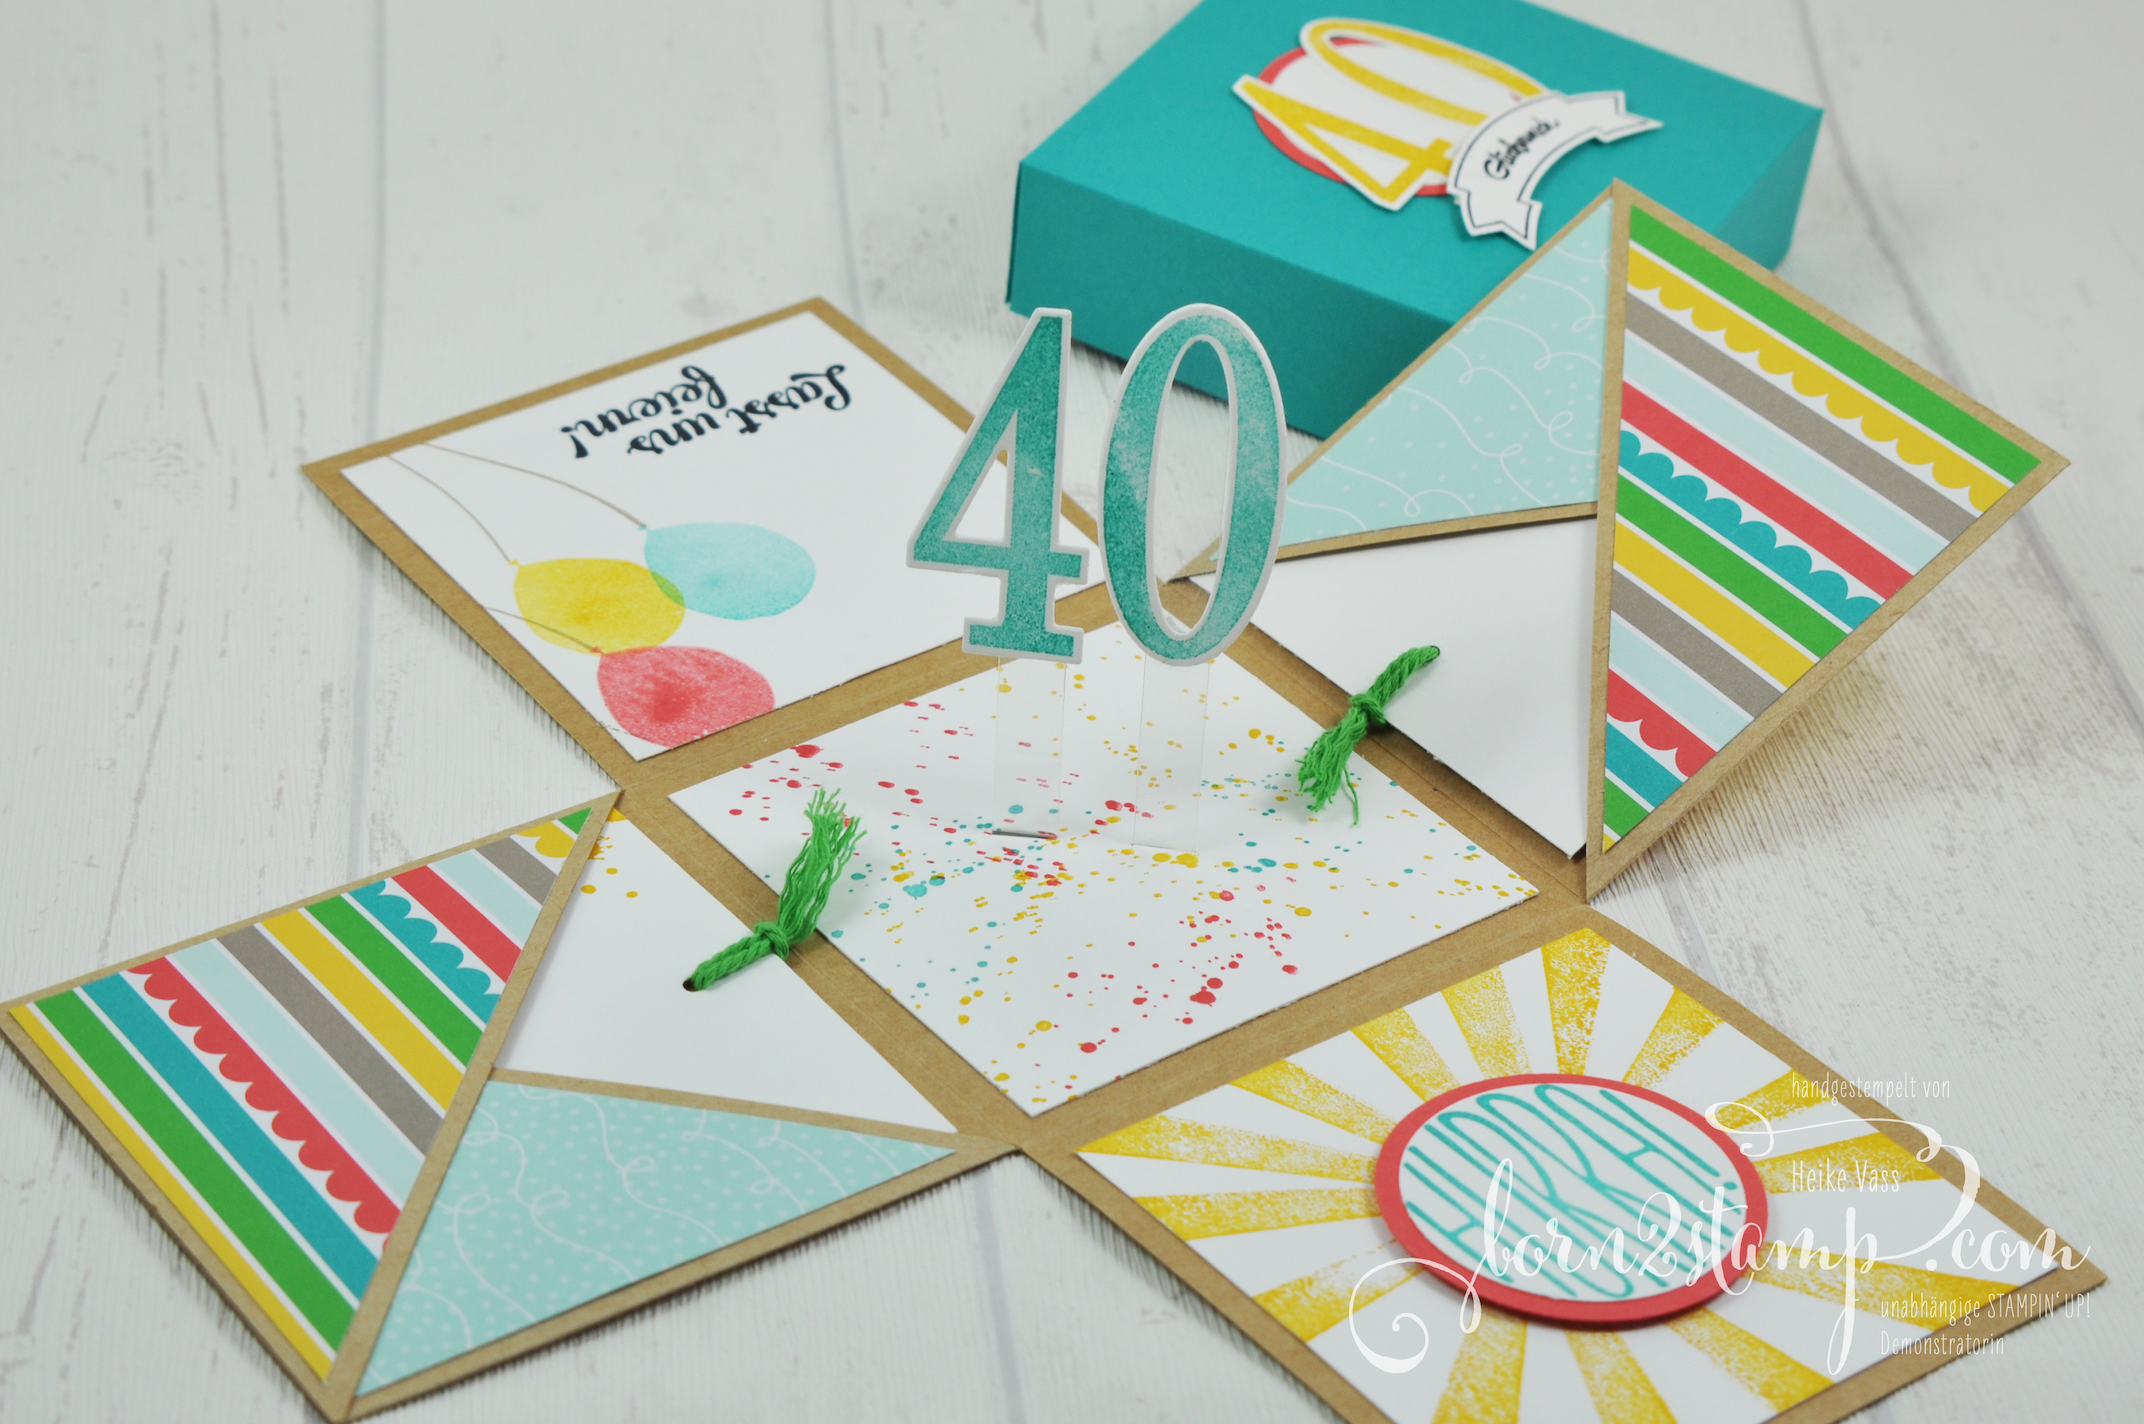 born2stamp STAMPIN‘ UP! Explosionsbox – Geburtstag – DSP Bunte Party – Konfetti-Gruesse – Gorgeous Grunge – Partyballons – So viele Jahre